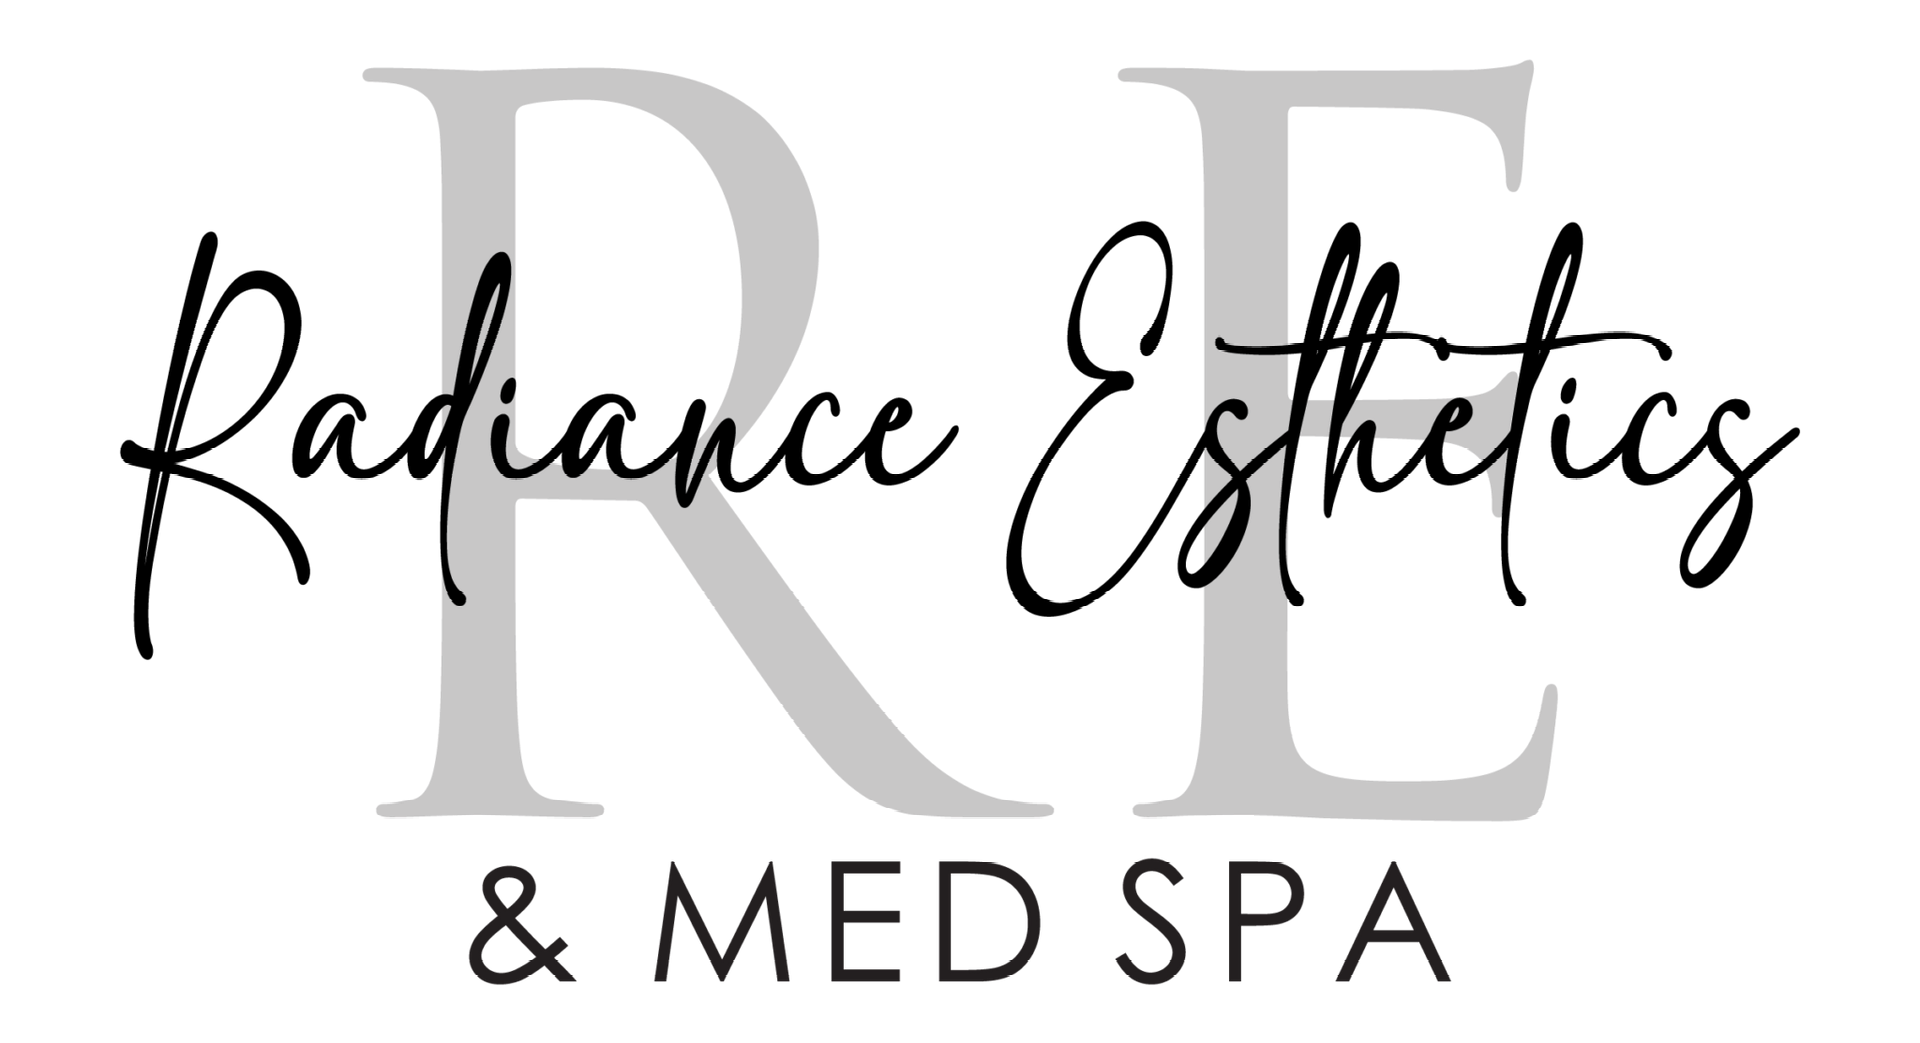 the logo for radiance esthetics and med spa is black and white .